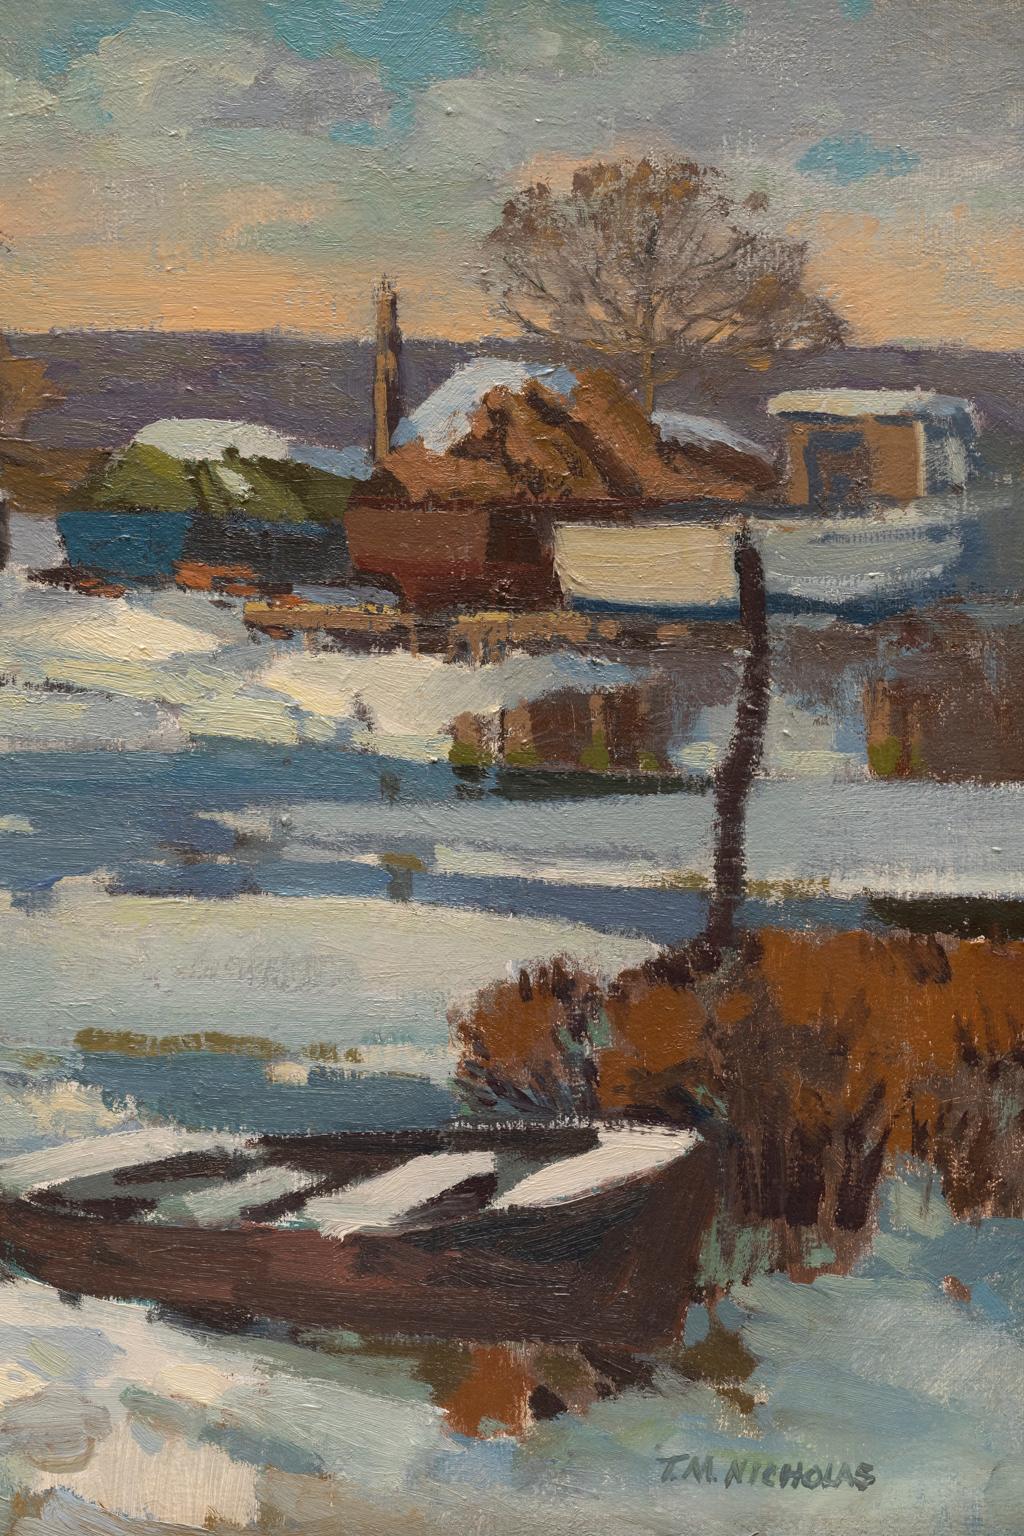 SALE ONE WEEK ONLY

The untitled oil painting of a quiet country winter scene is a typical subject matter for T. M. Nicholas who is considered by many to be among the most prominent painter of his generation and specifically of the Rockport School